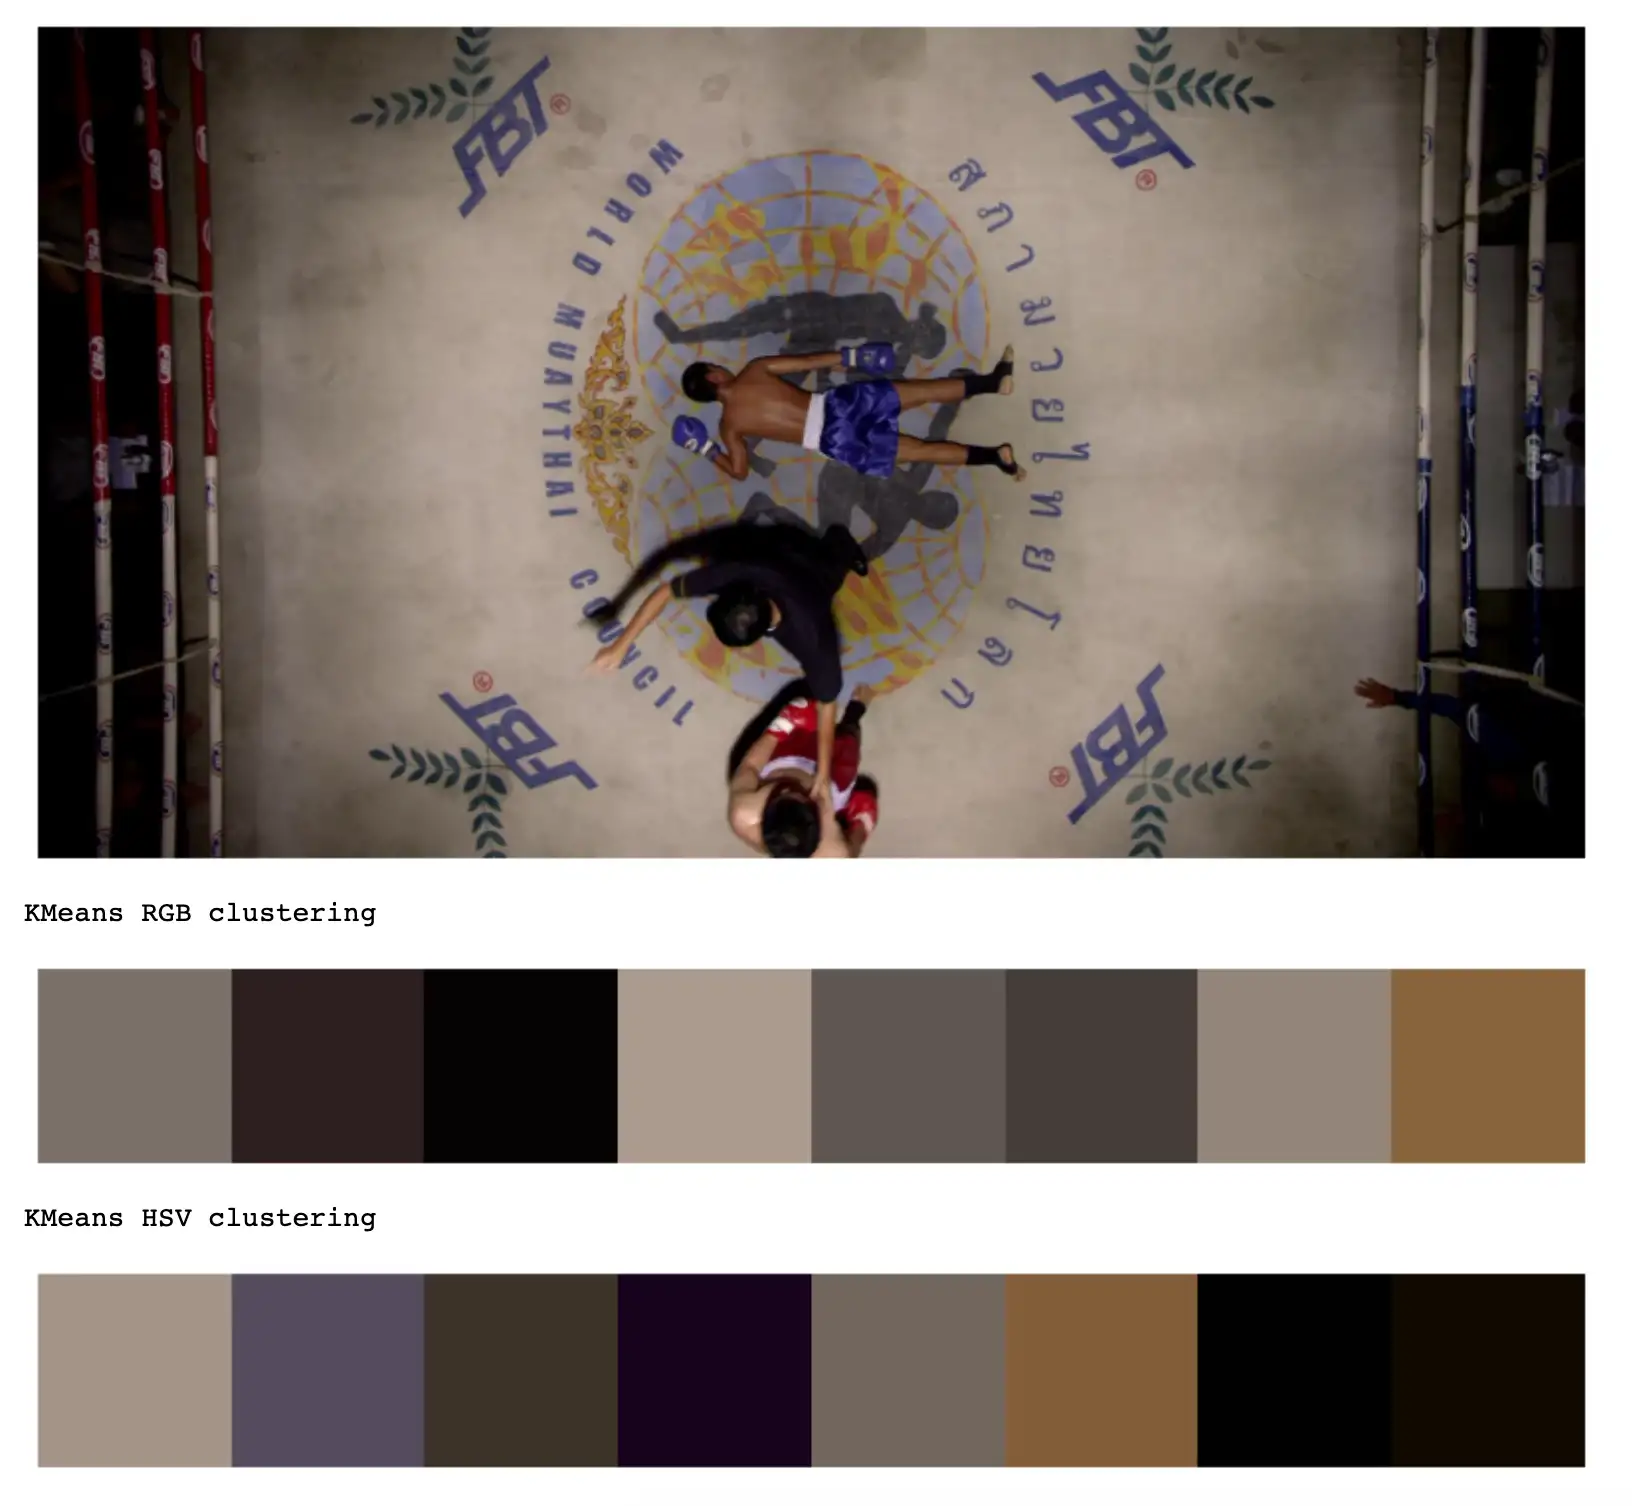 Still from Only God Forgives (2013) with k-means generated palettes using RGB and HSV colors